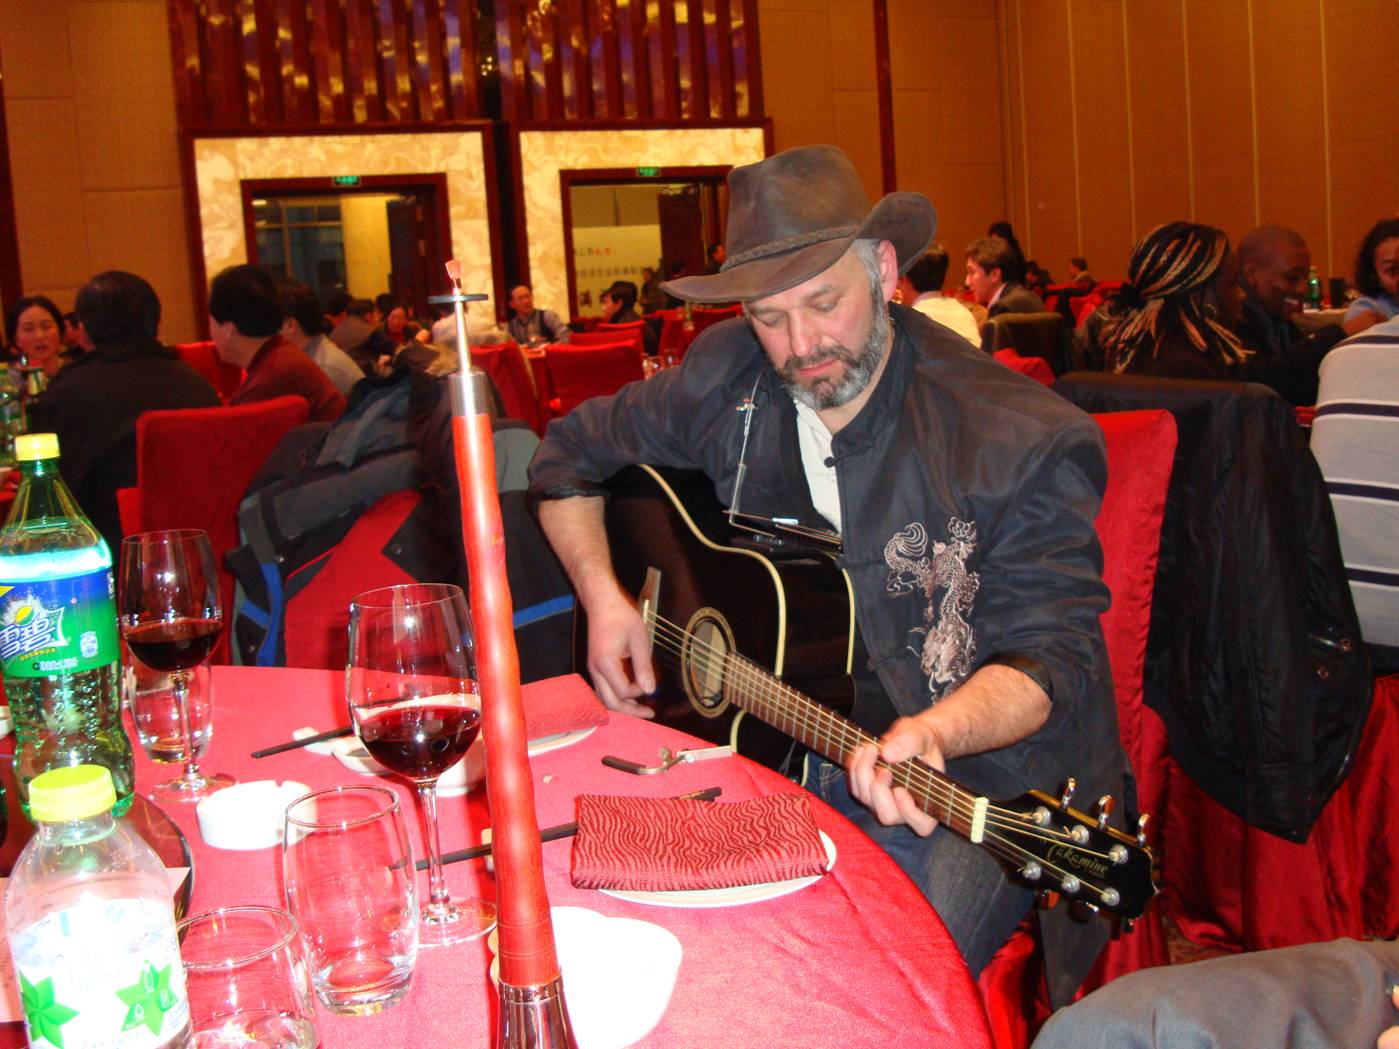 Sean Sartos from New York, one of the Lambton teachers, warms up at our table before contributing to the performances.  The AEFI New Year's Party, Wuxi, China